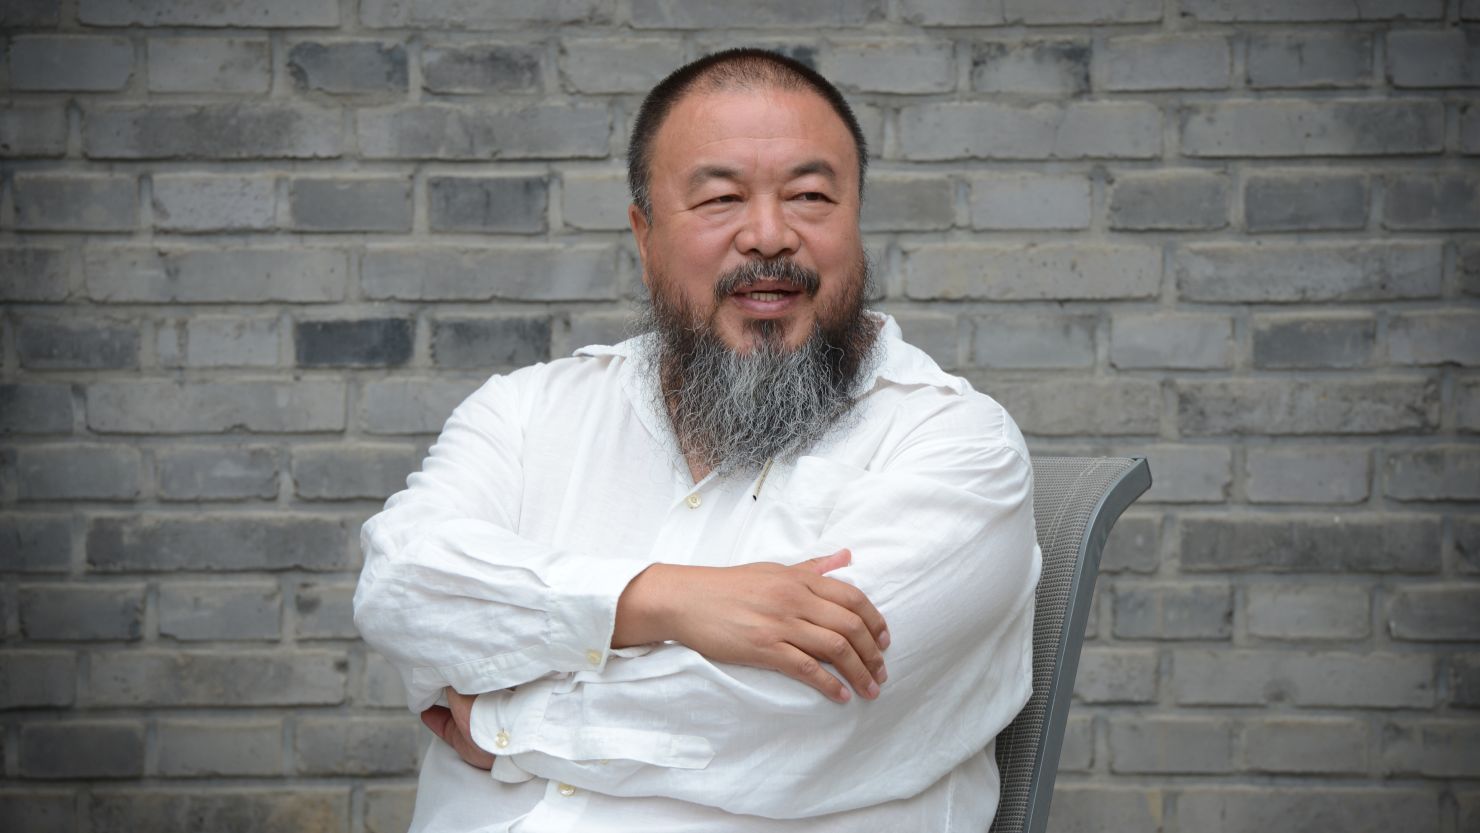 Ai Weiwei says Americans should be proud of their democracy -- and that China's one-party system is inhuman.